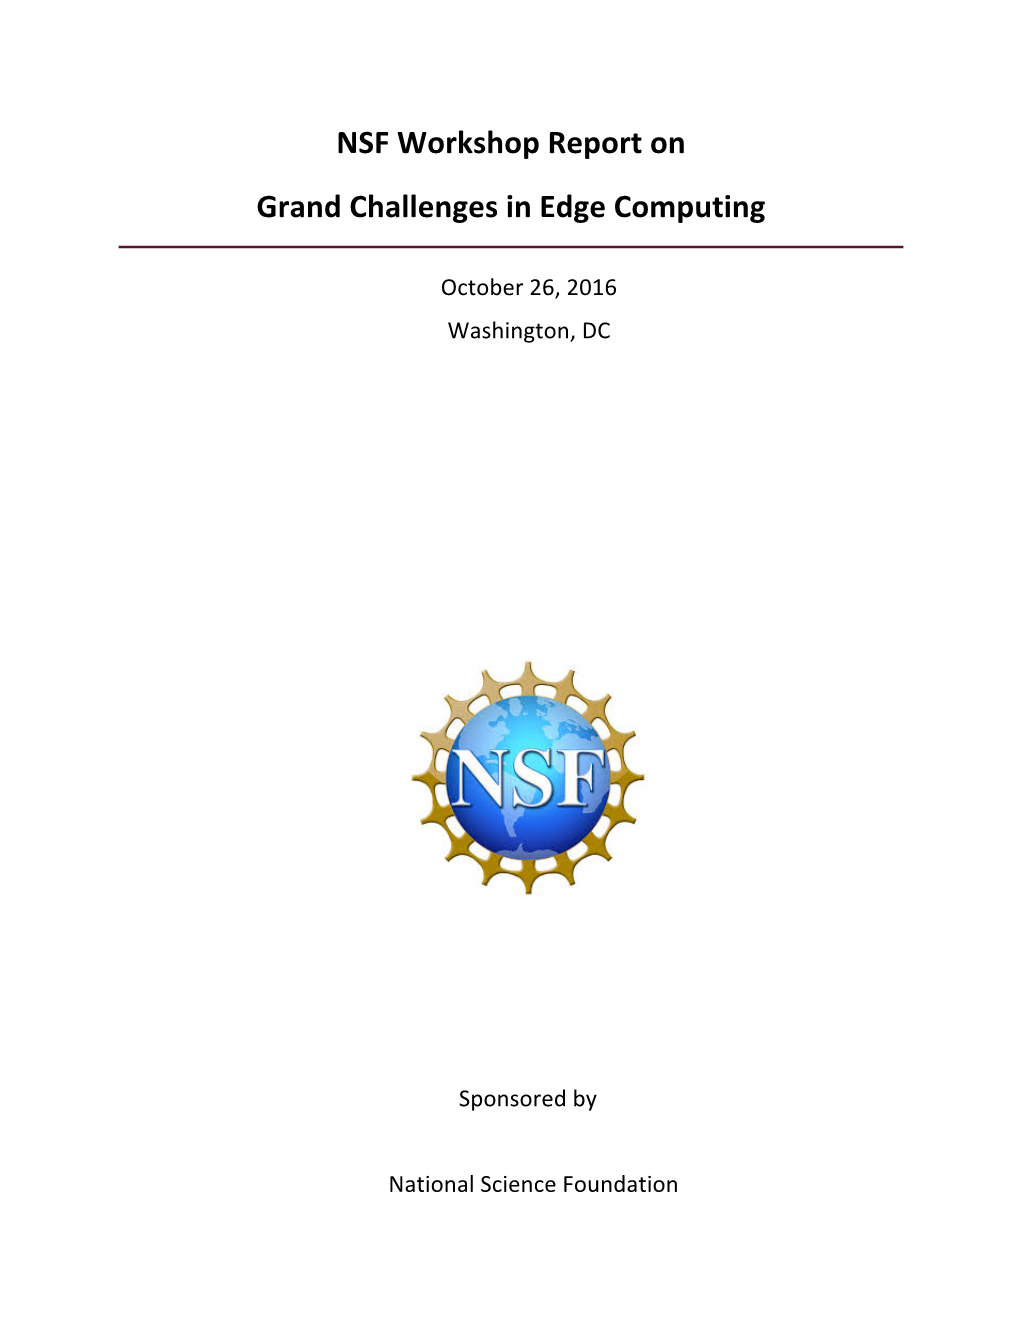 NSF Workshop Report on Grand Challenges in Edge Computing